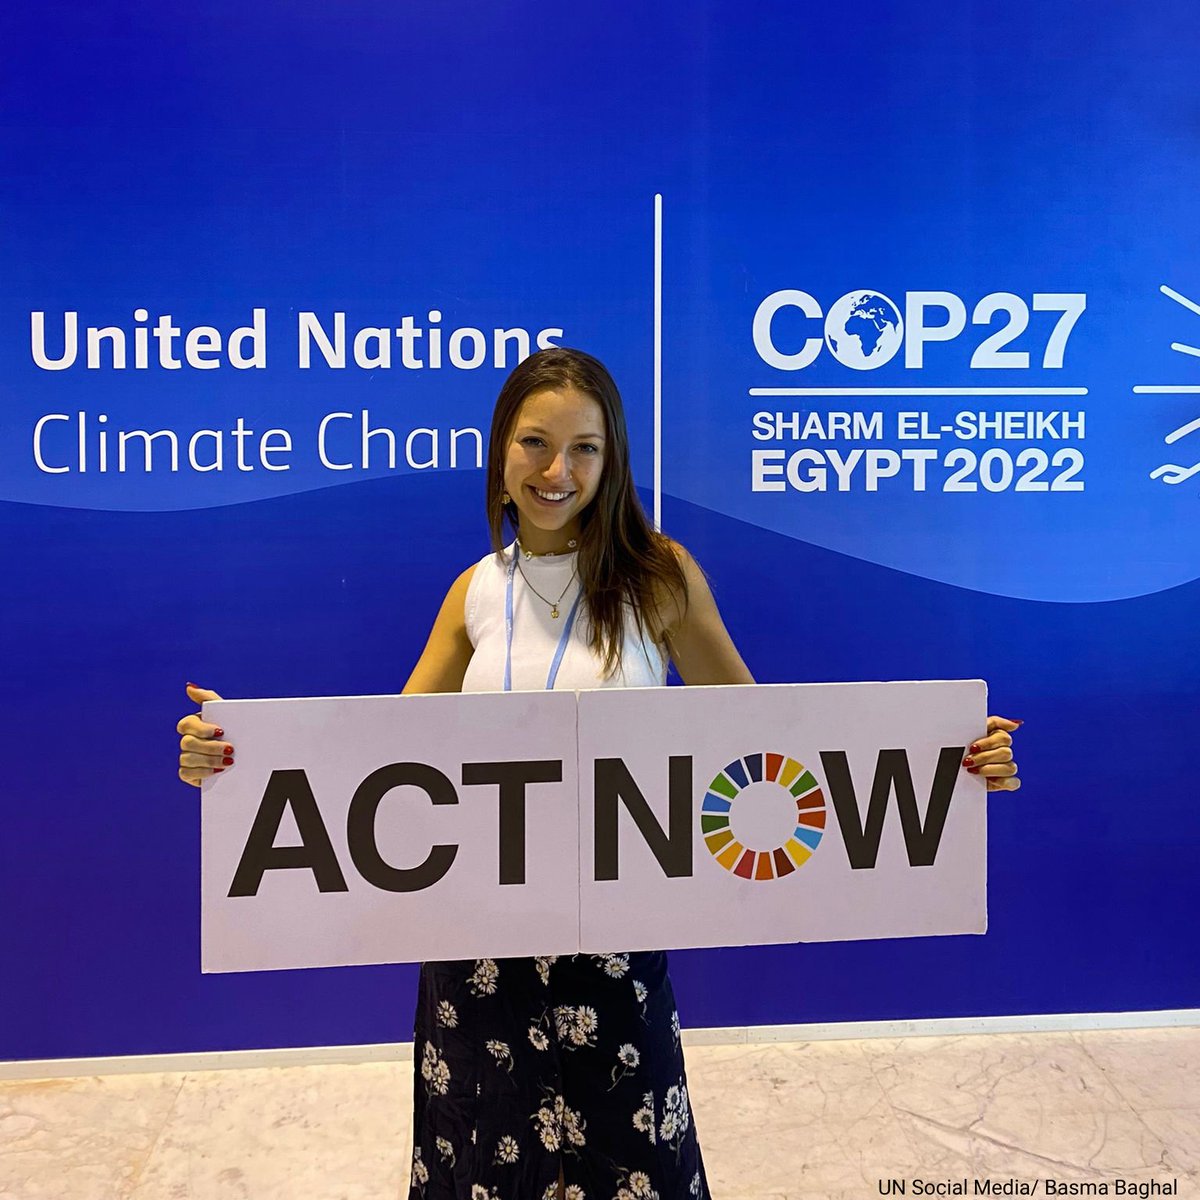 Young climate activists & influencers from around the world have spent the last two weeks demanding urgent #ClimateAction at the UN Climate Conference #COP27 in Egypt. Here's how you can #ActNow: un.org/actnow